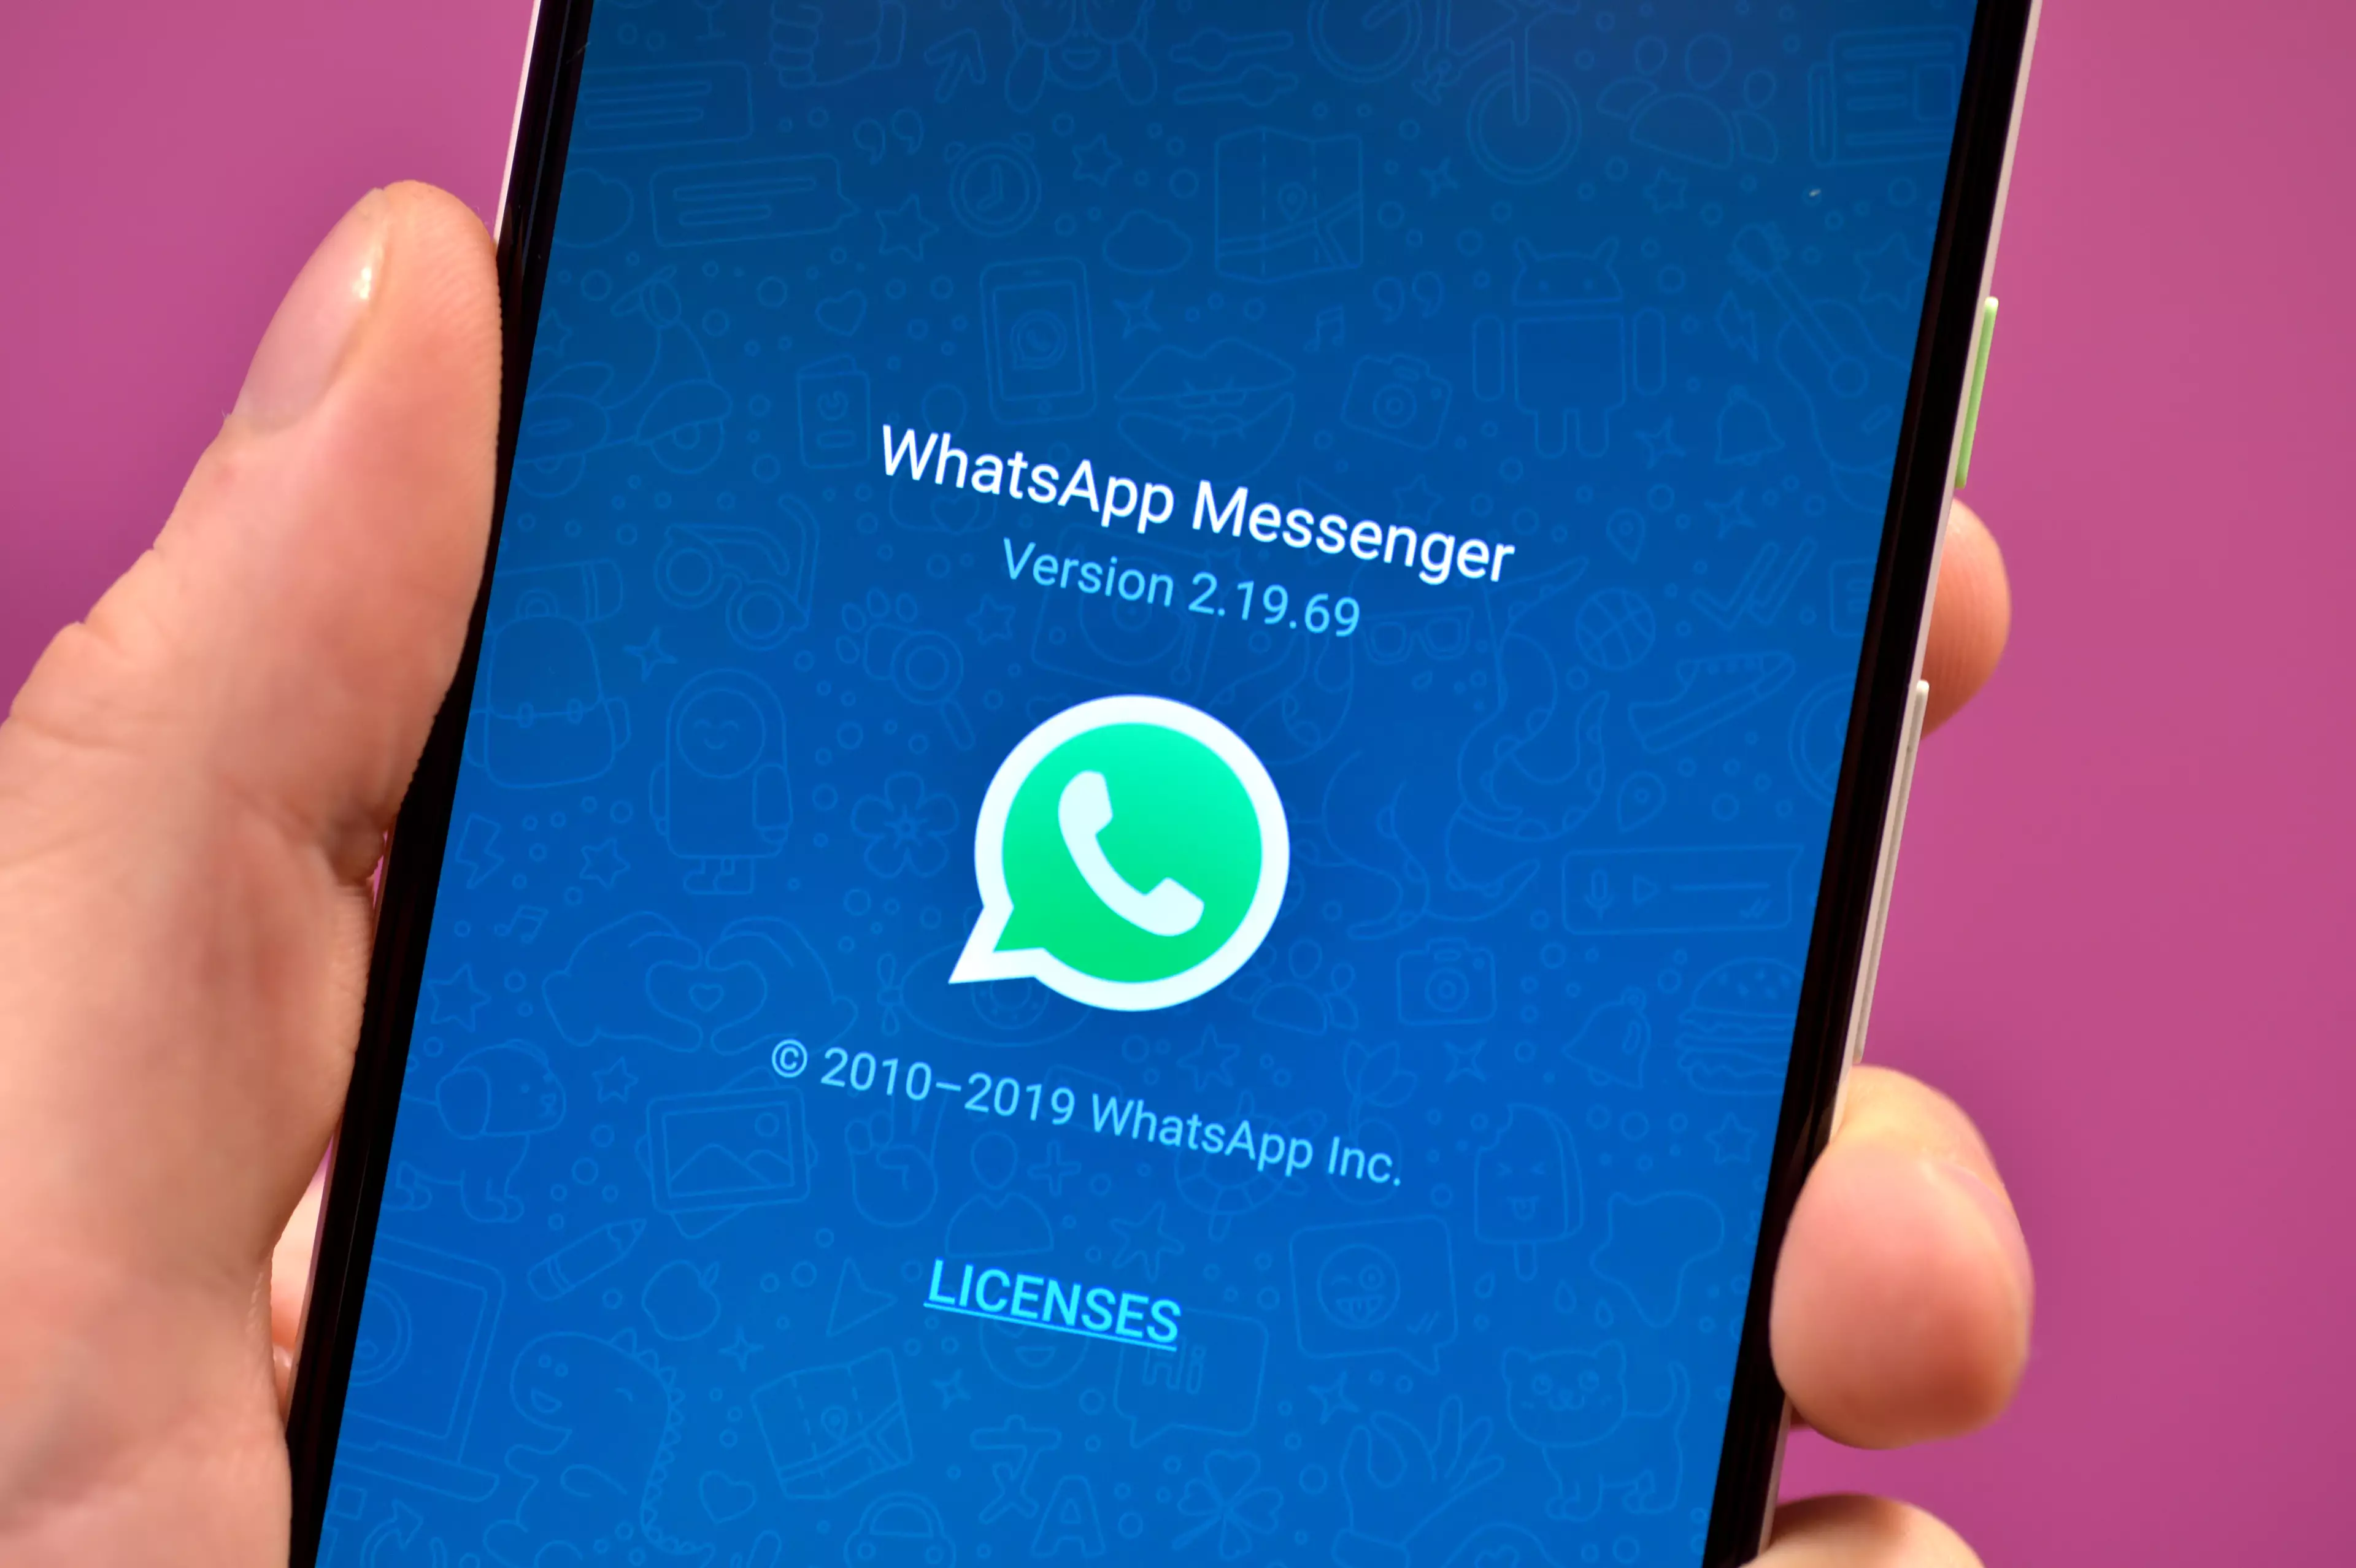 WhatsApp has encouraged all users to update their apps.